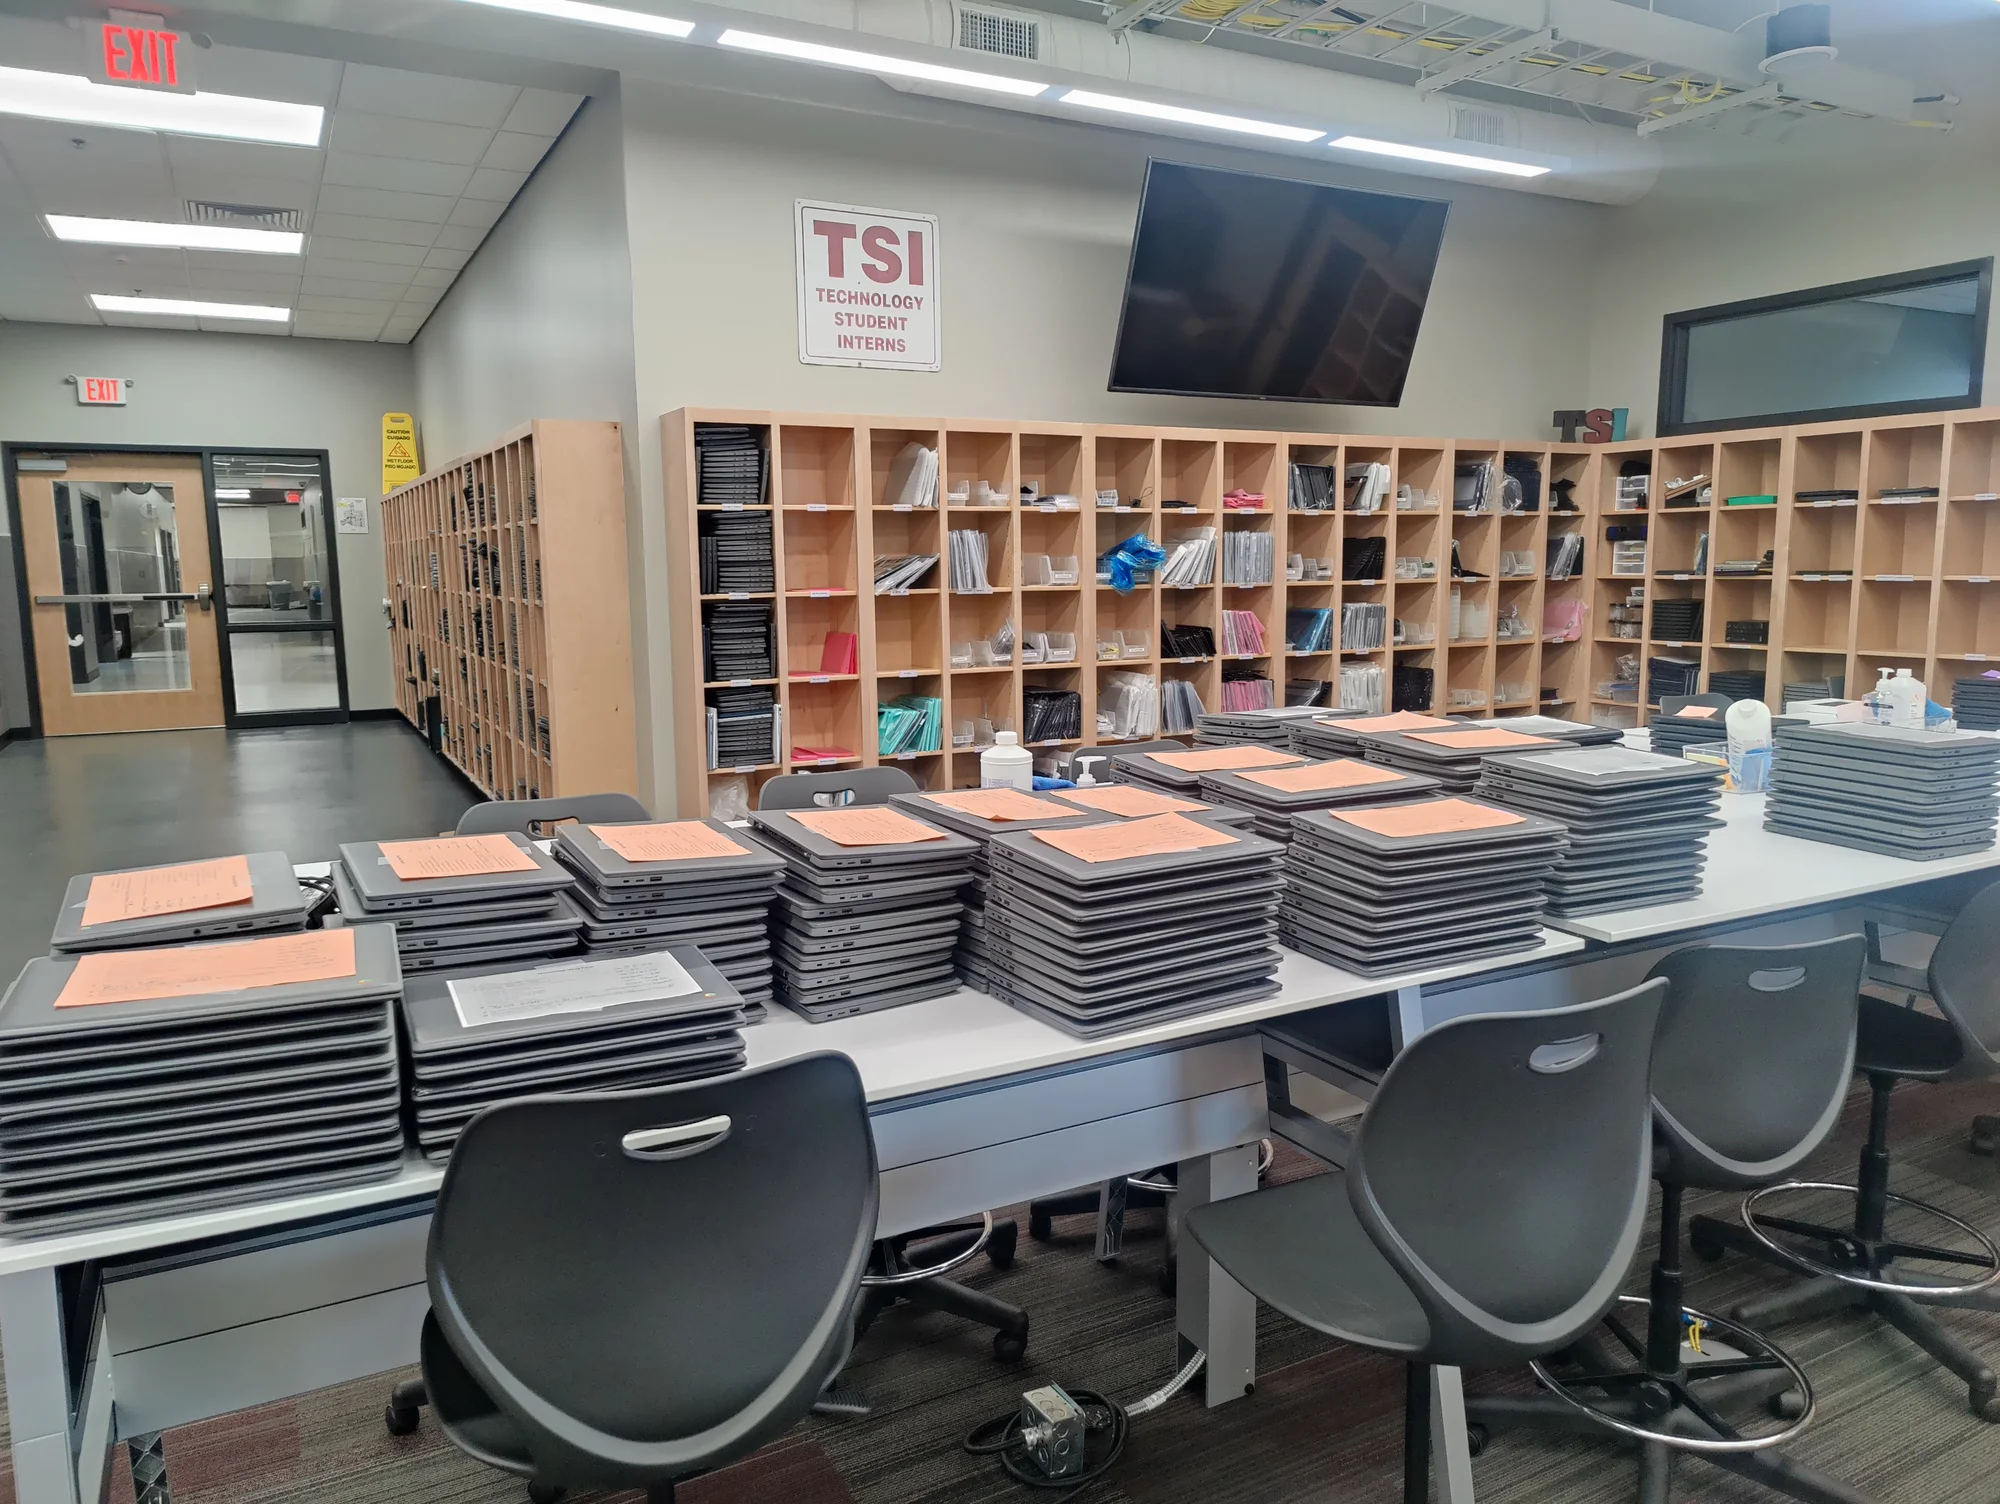 Stacks of Chromebooks on a table awaiting repair